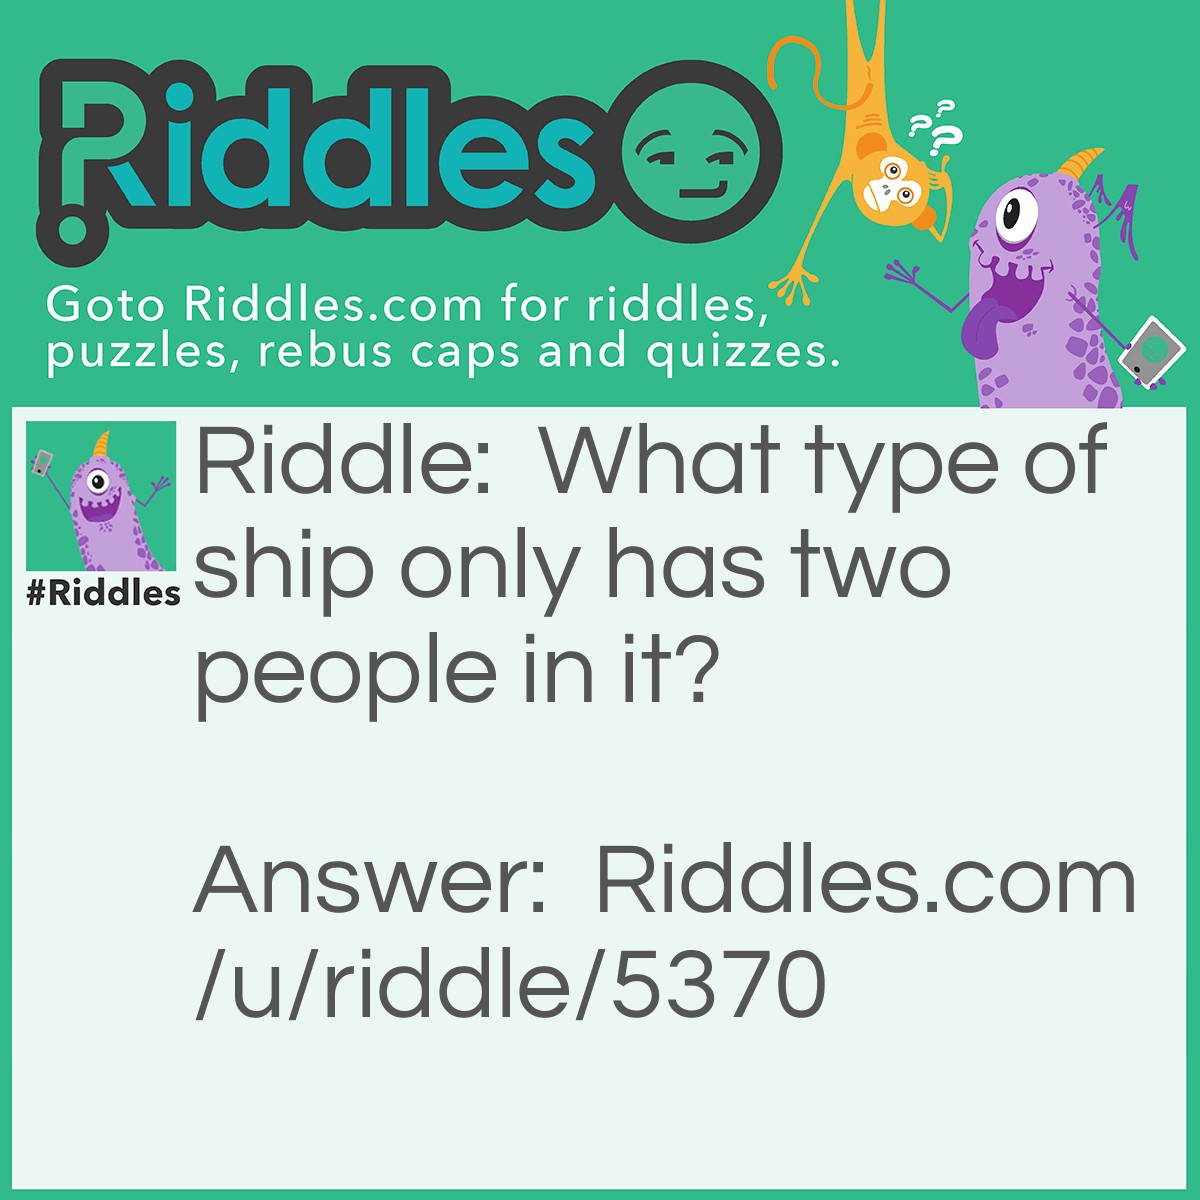 Riddle: What type of ship only has two people in it? Answer: A relationship.